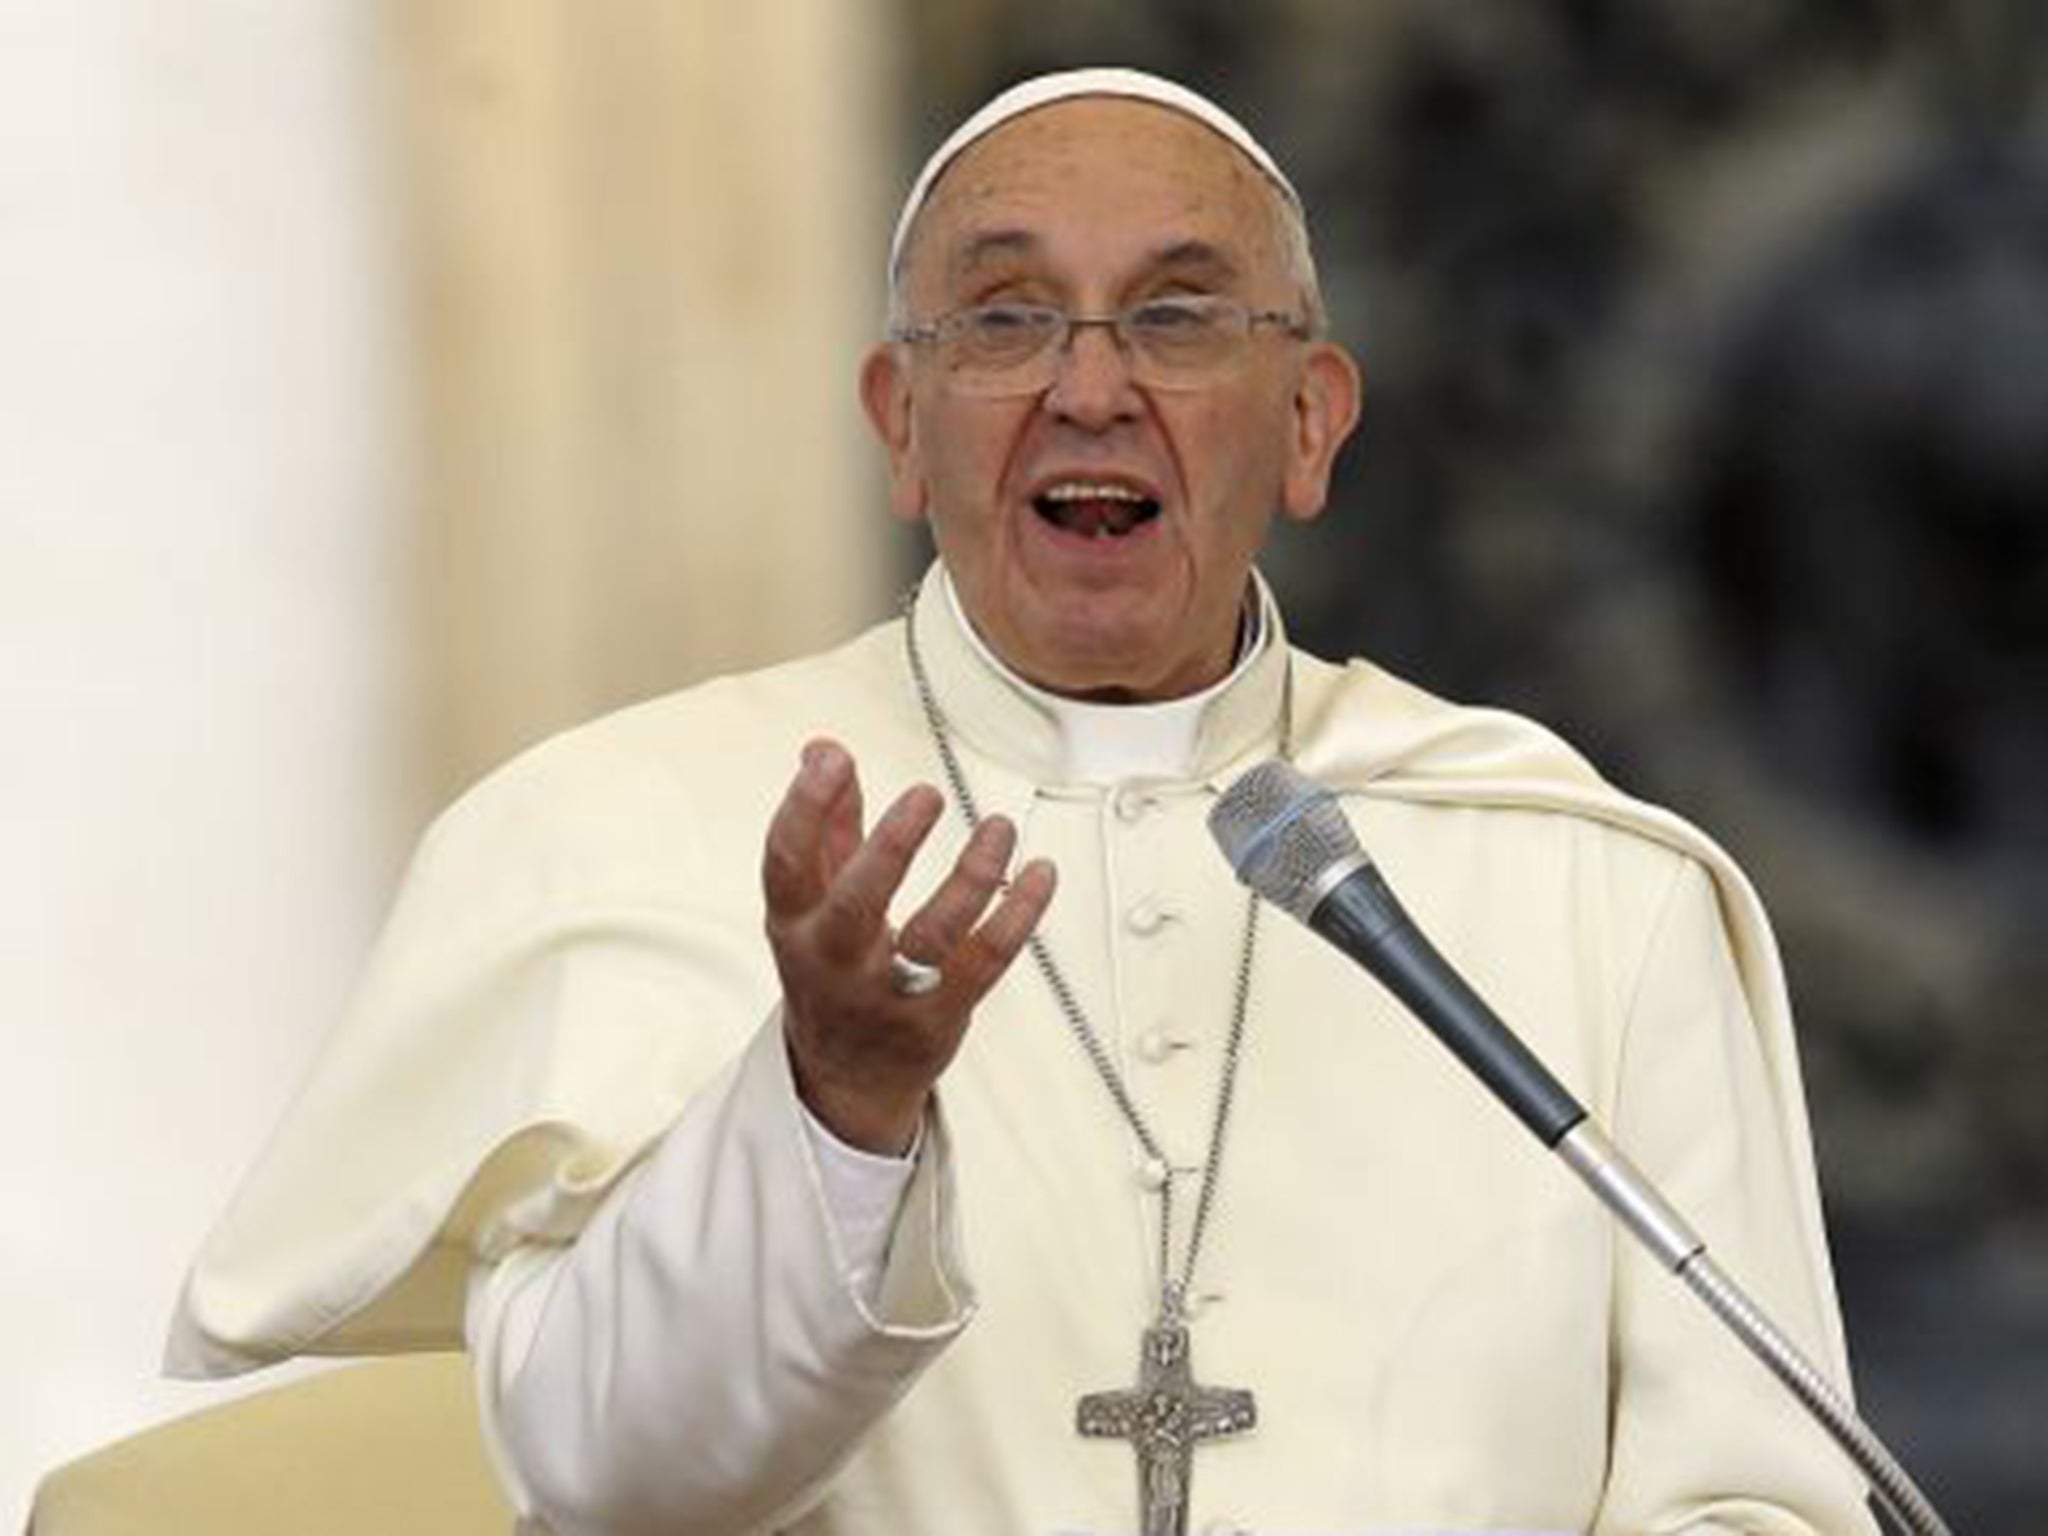 Pope Francis has warned that the world is heading for “unprecedented destruction” unless mankind confronts climate change